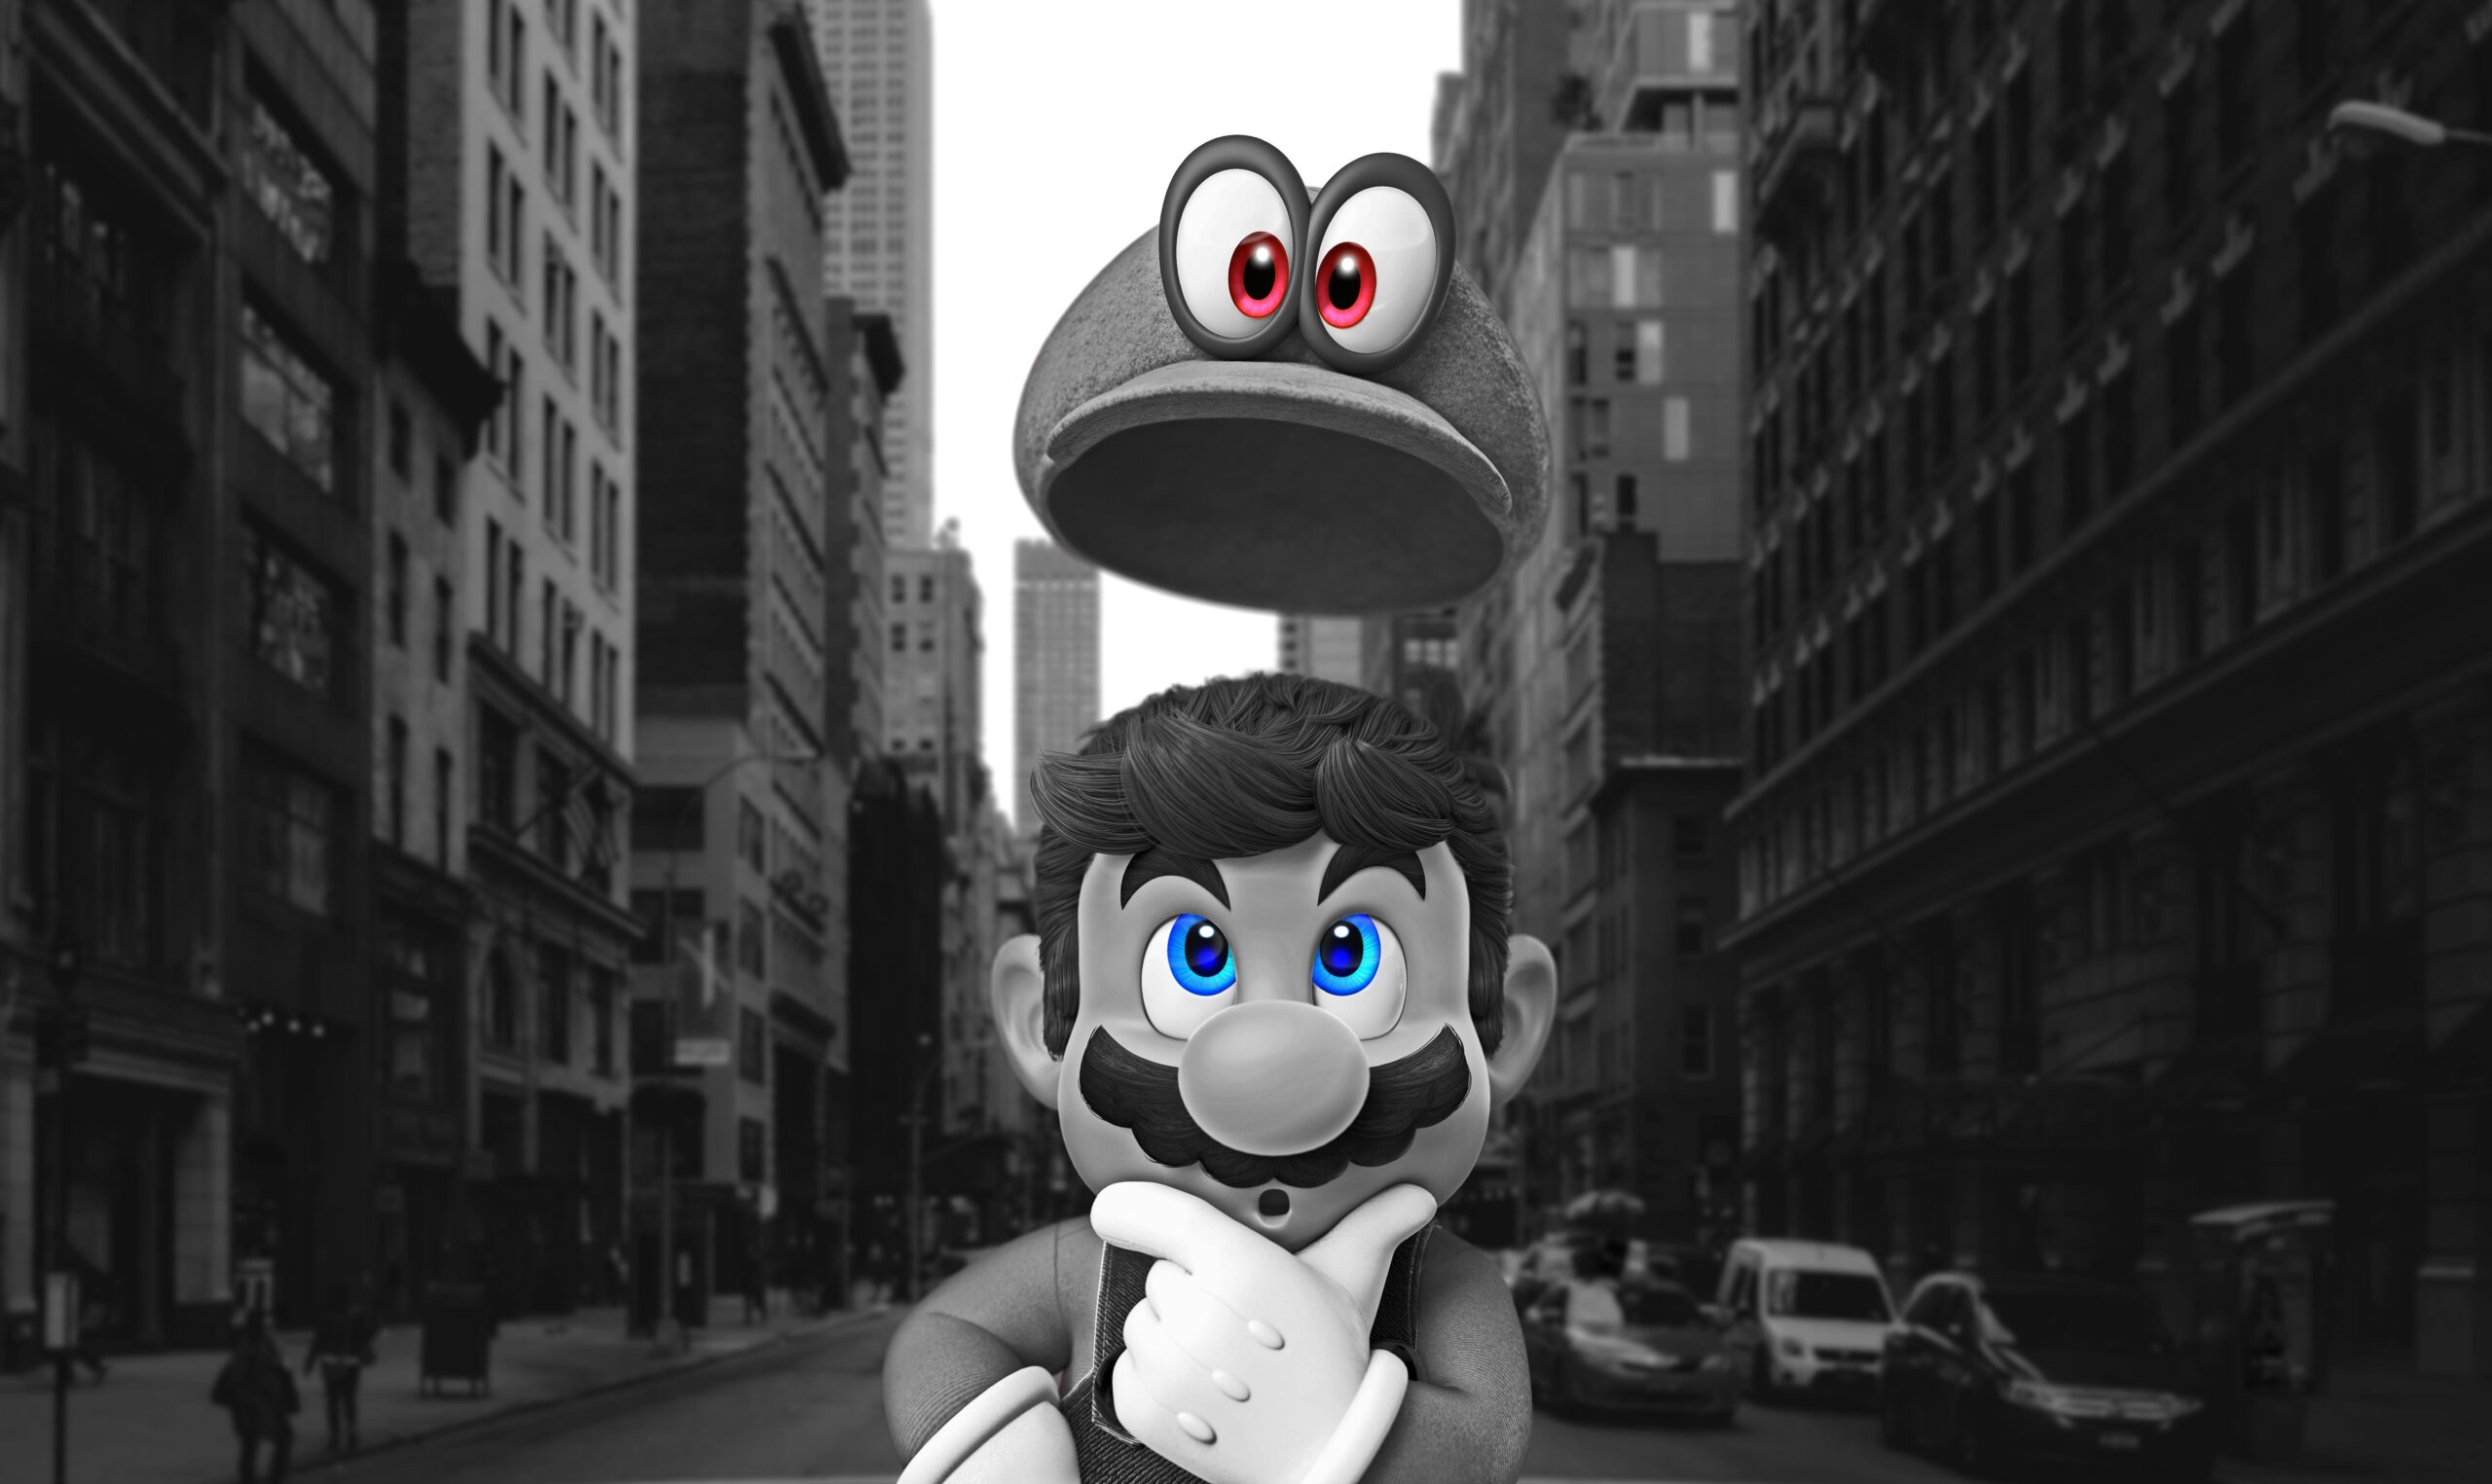 Saw Mario Odyssey and made a few Wallpapers